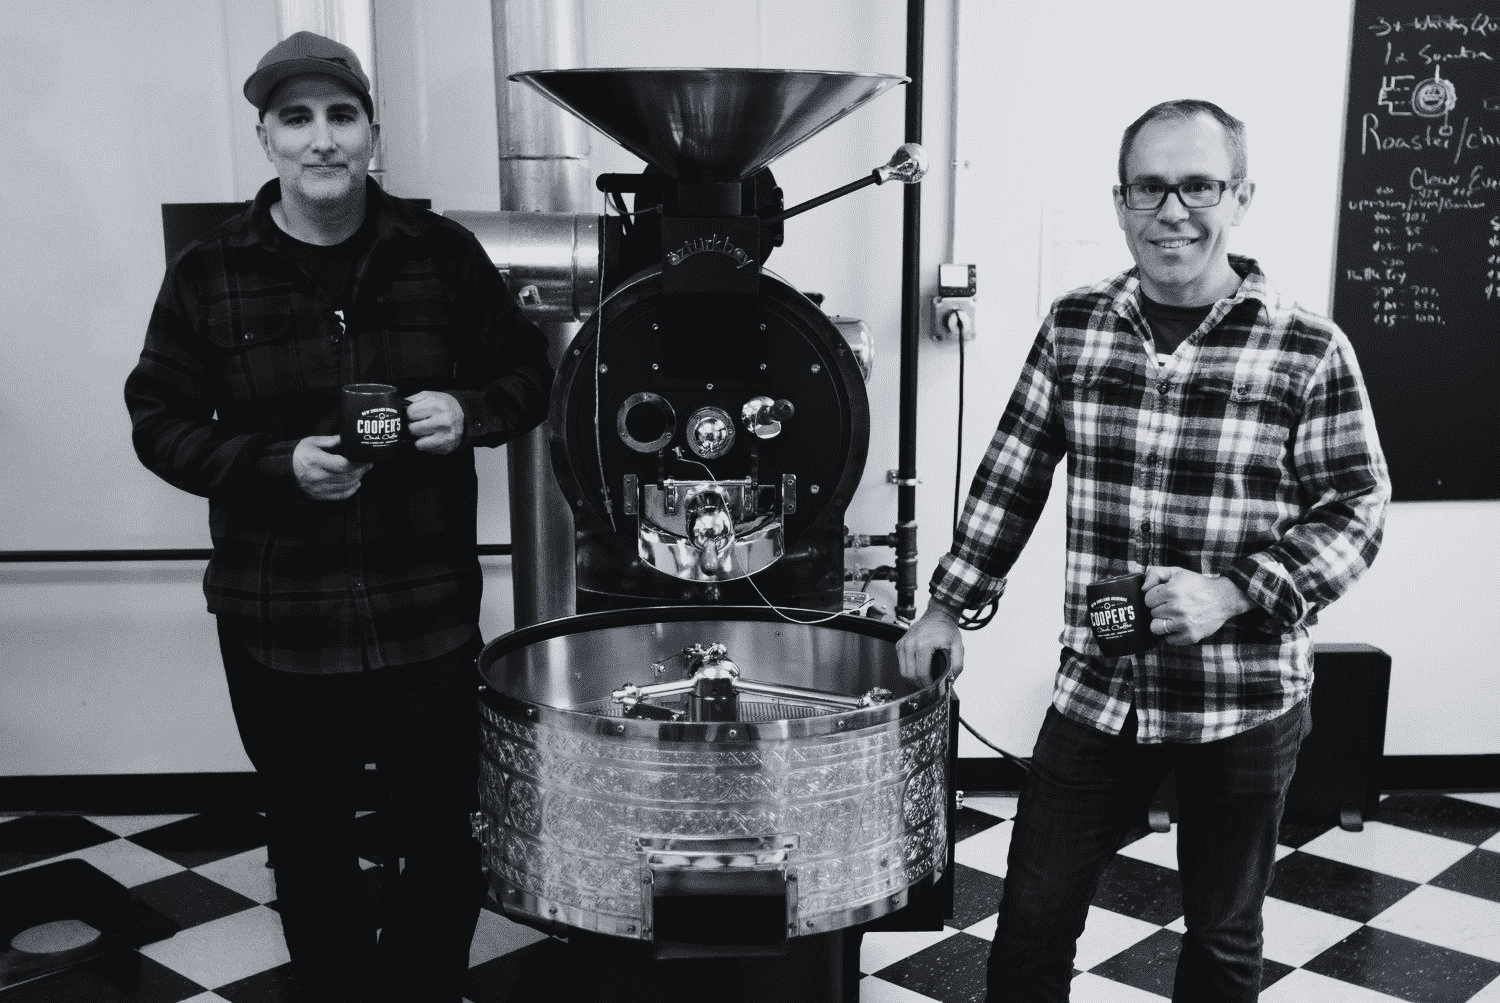 The team works on the production of single-serve whiskey coffee